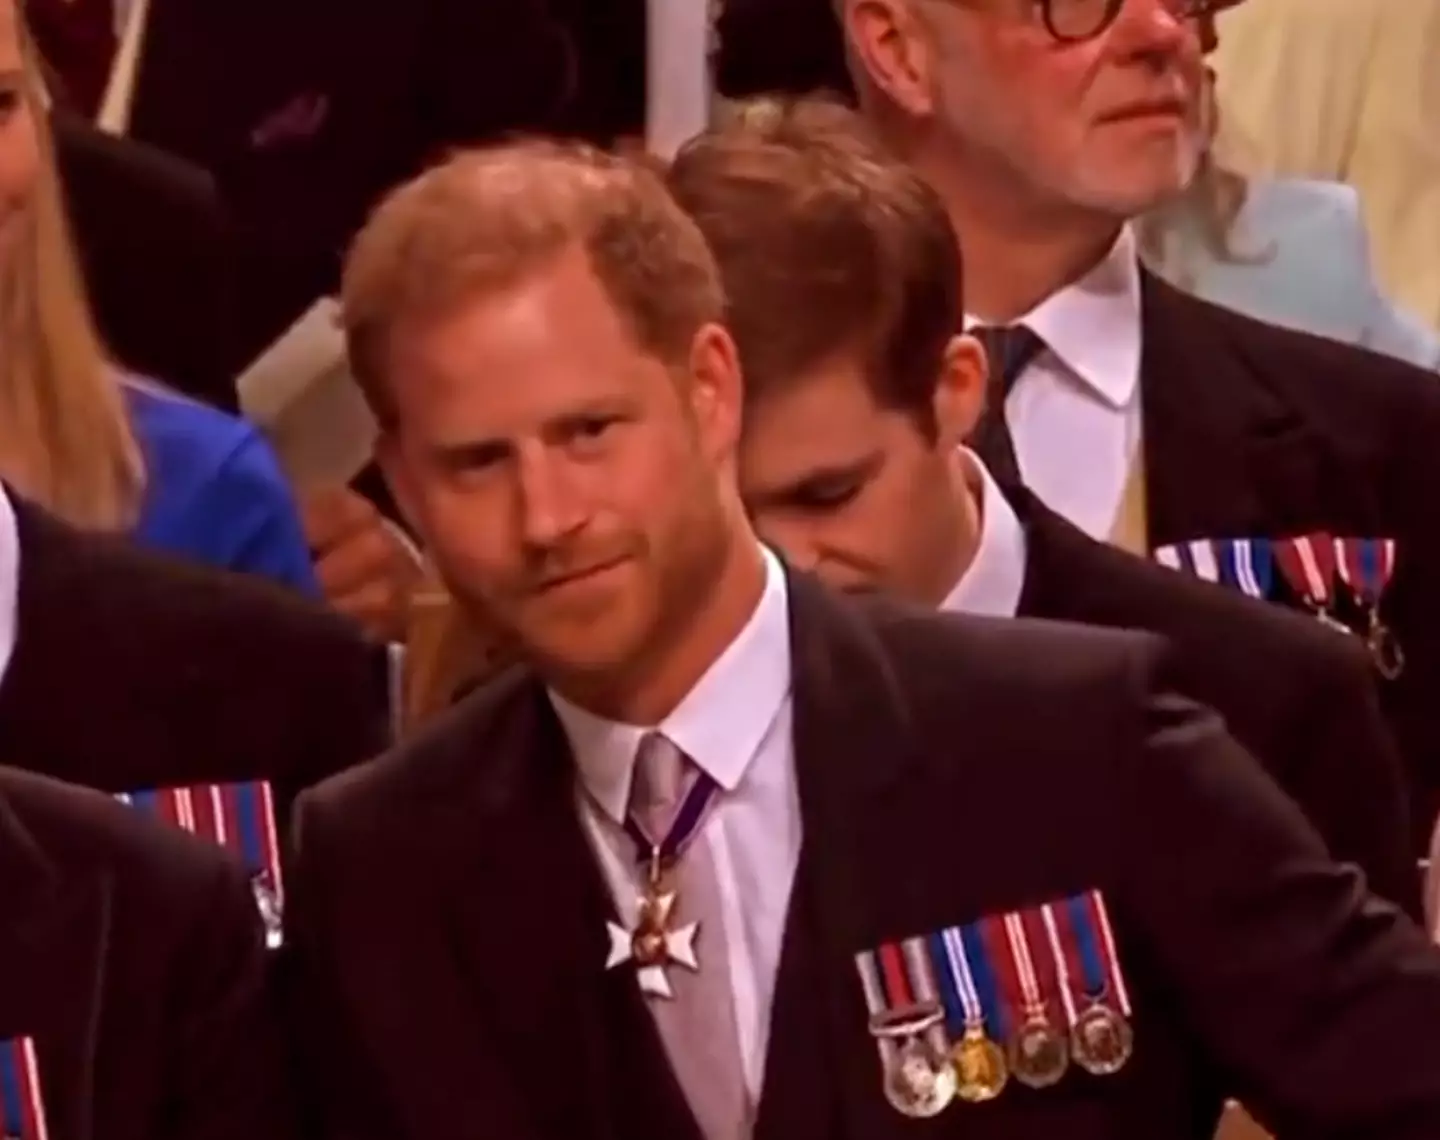 Prince Harry attended the event alone.